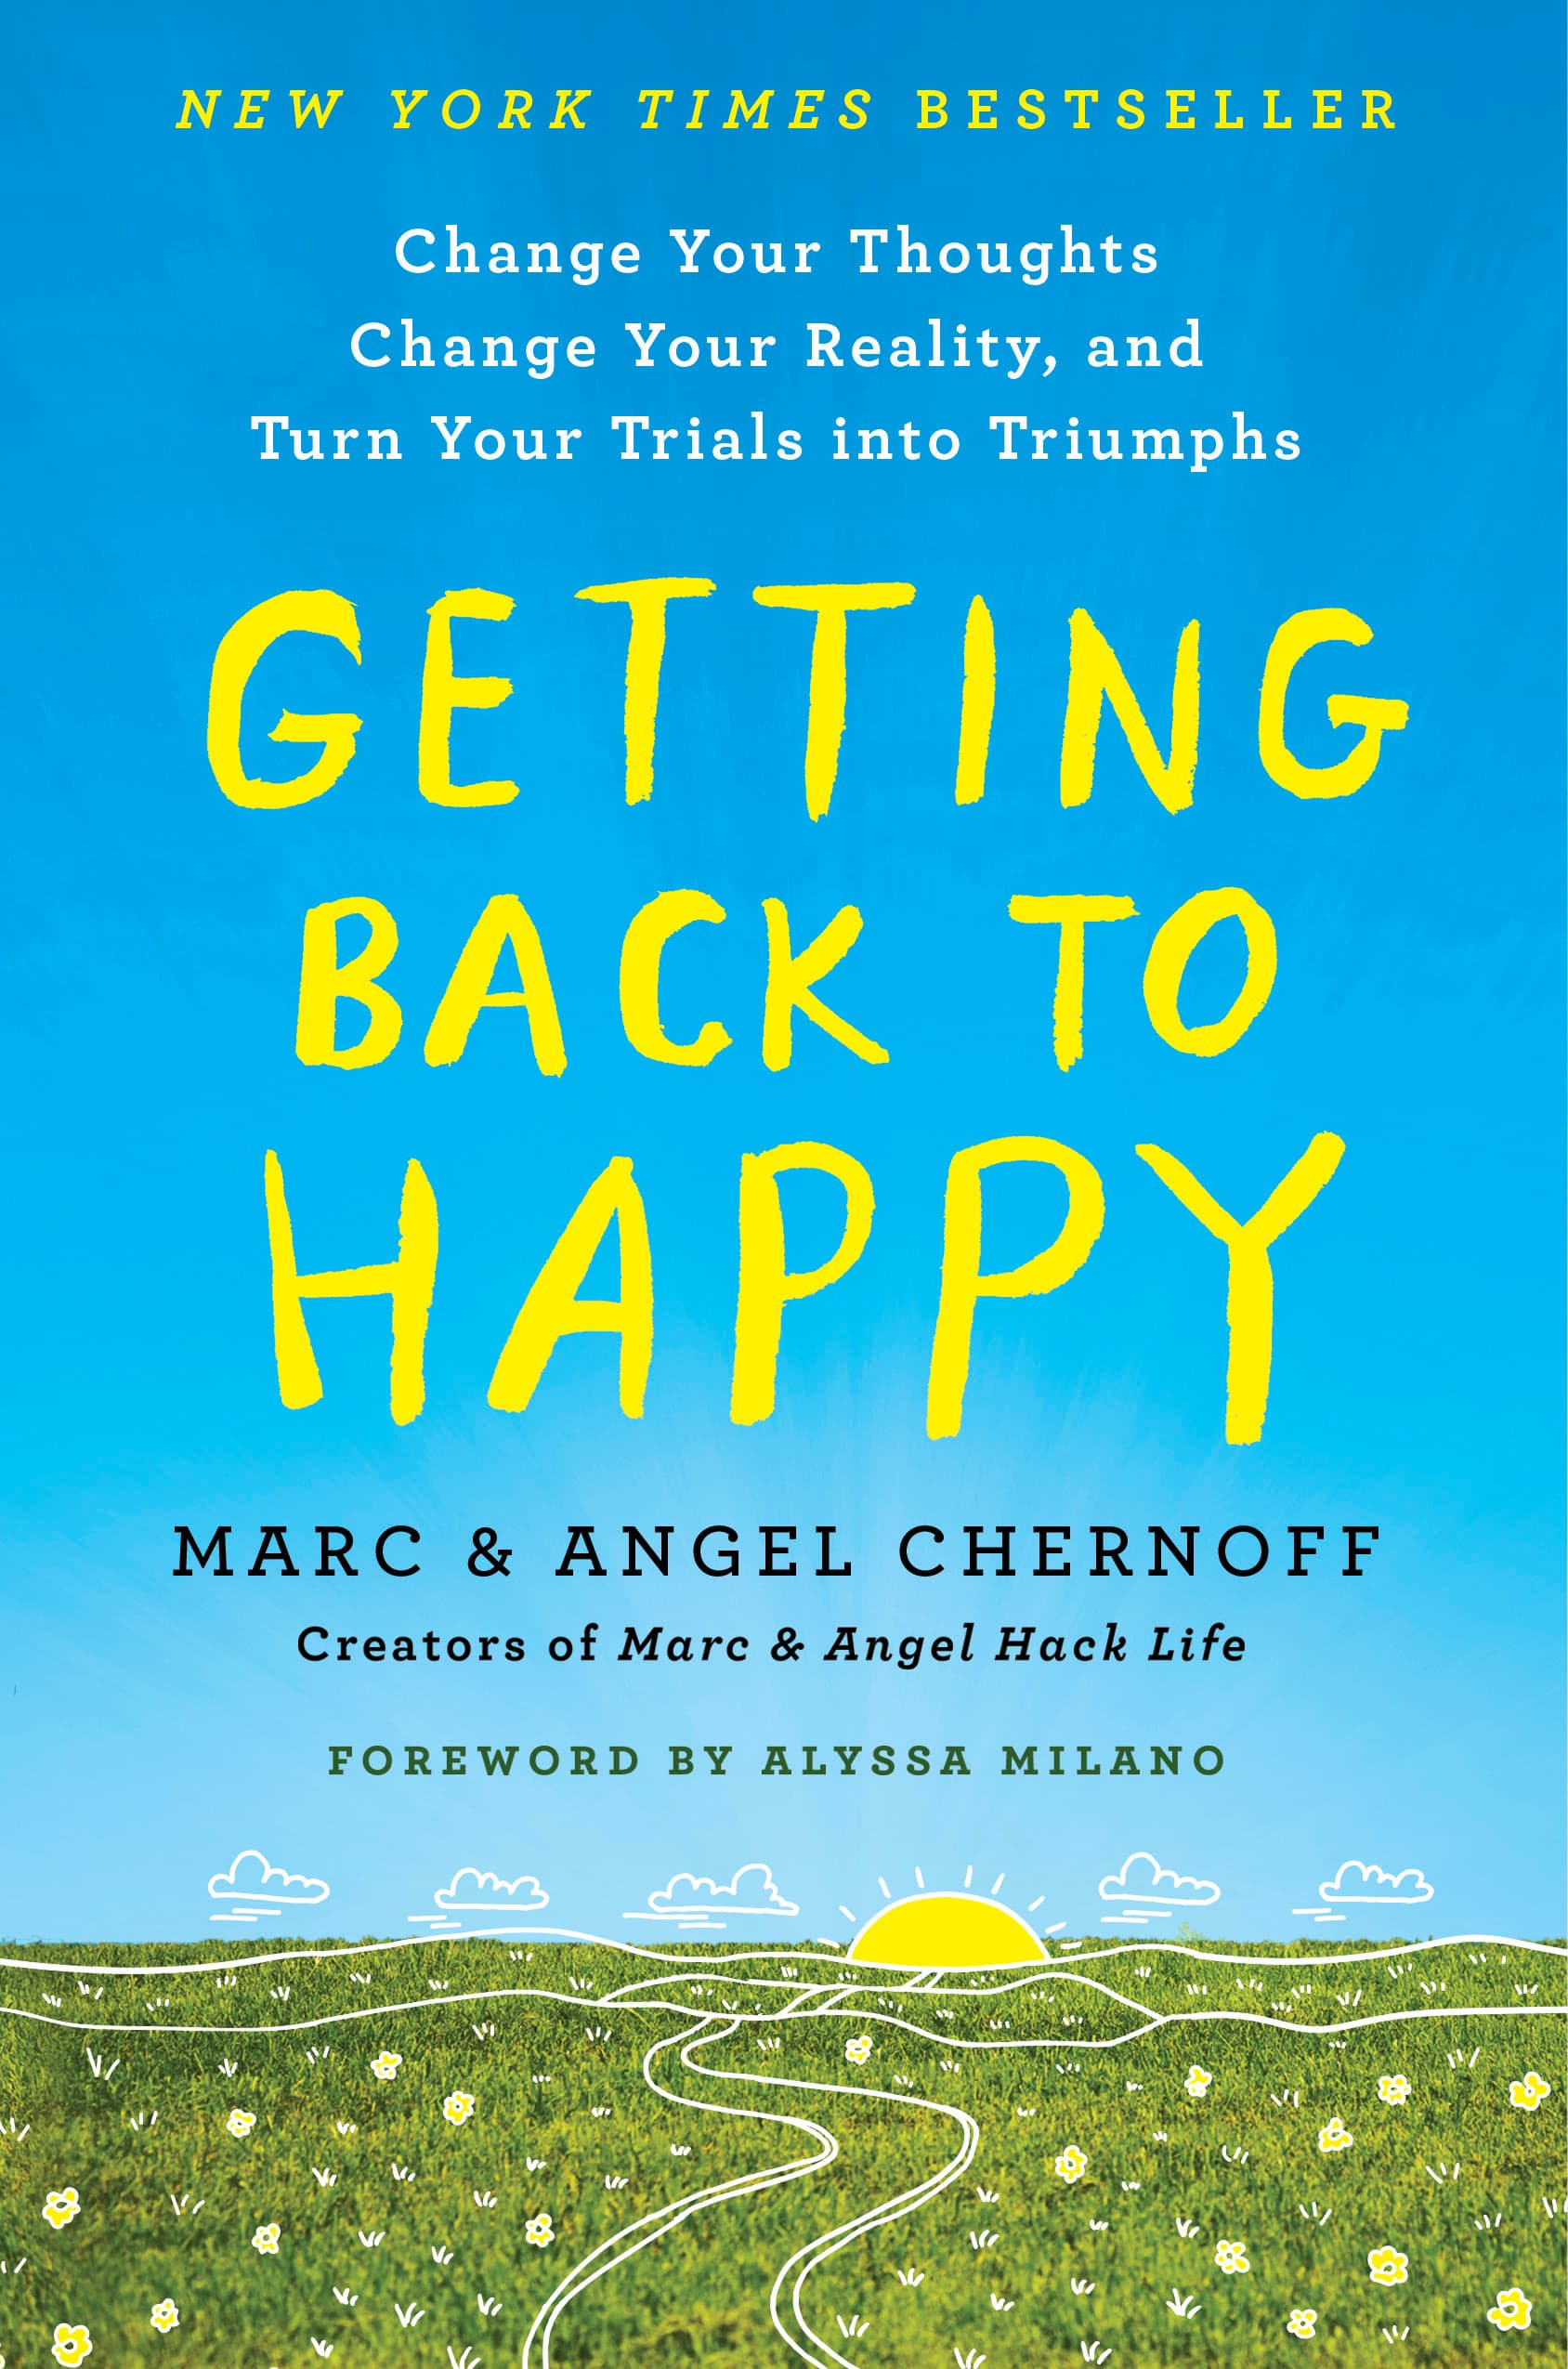 Getting Back to Happy by Marc and Angel Chernoff